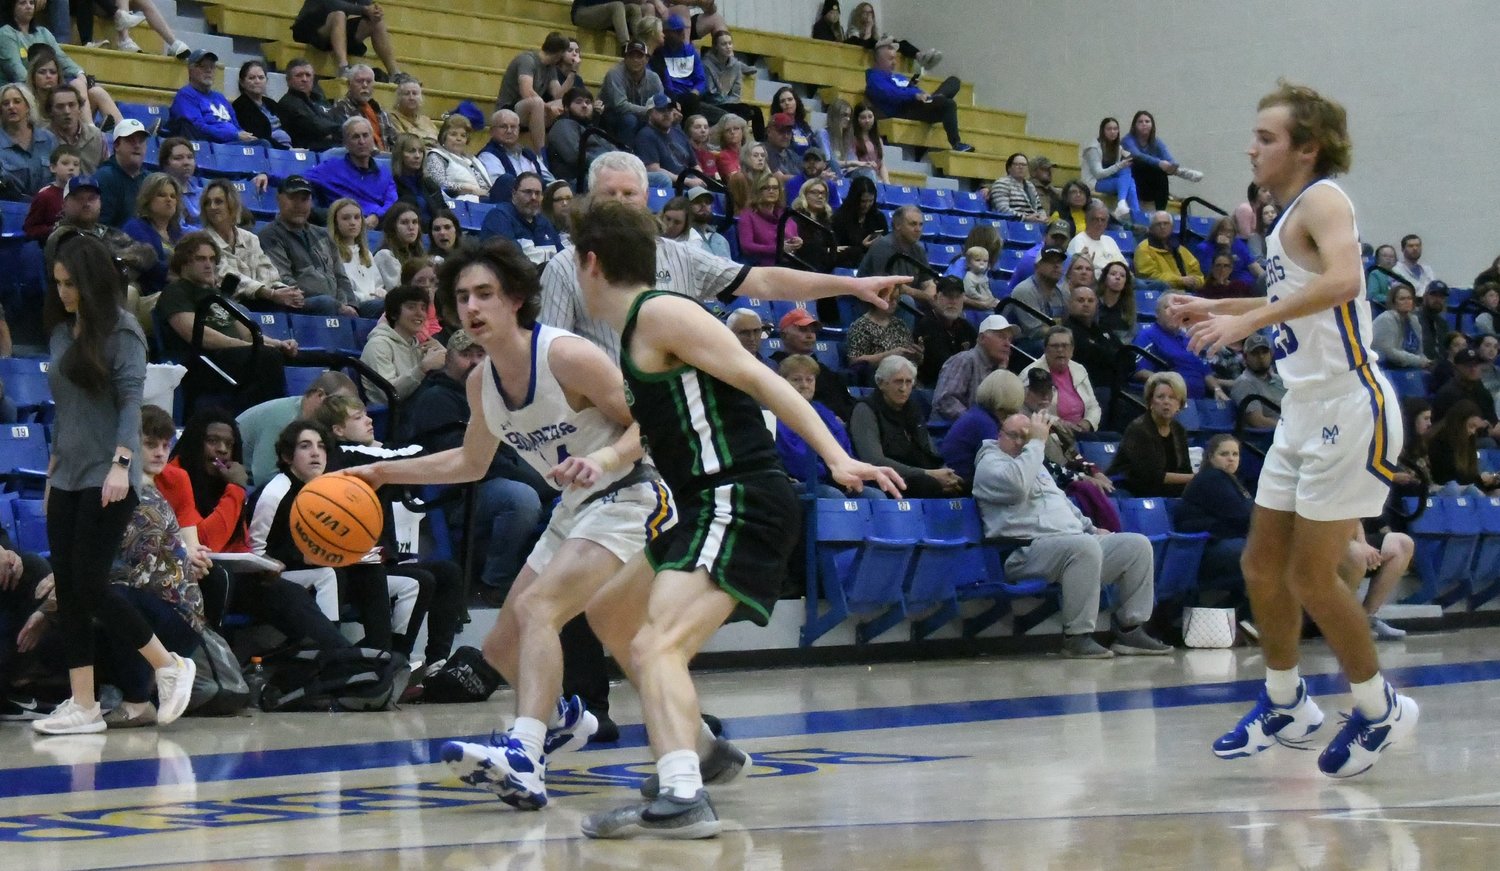 An image from the Mountain Home-Greene County Tech senior boys game played Wednesday in the Ultimate Auto Group Invitational at The Hangar.